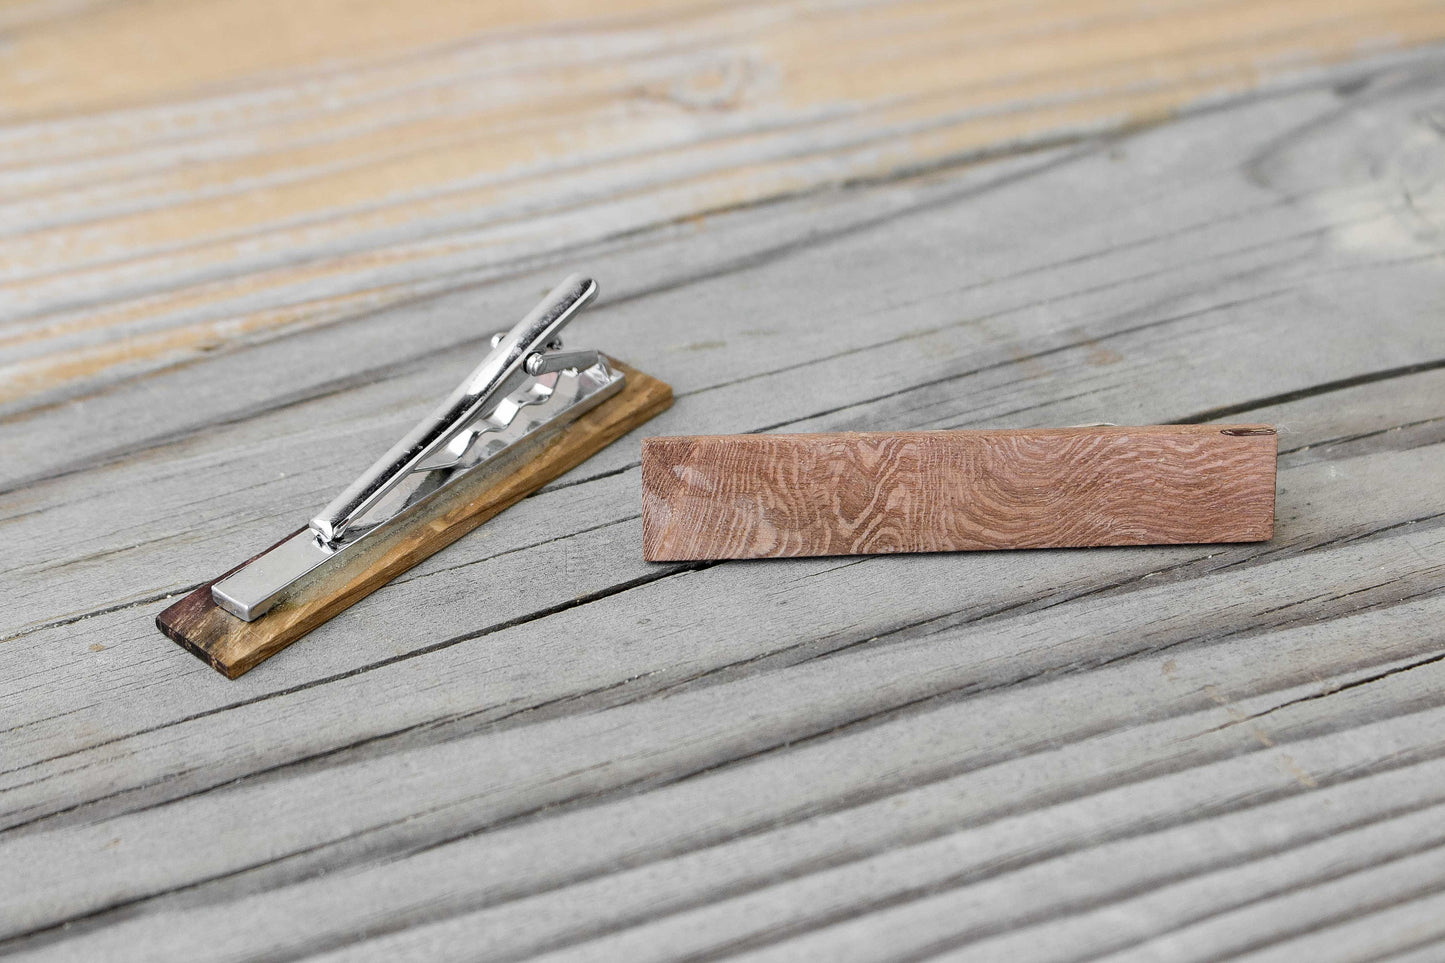 Old Vine Grapevine Tie Clip "Barua" - made from retired Napa grapevines - 100% Recycled!